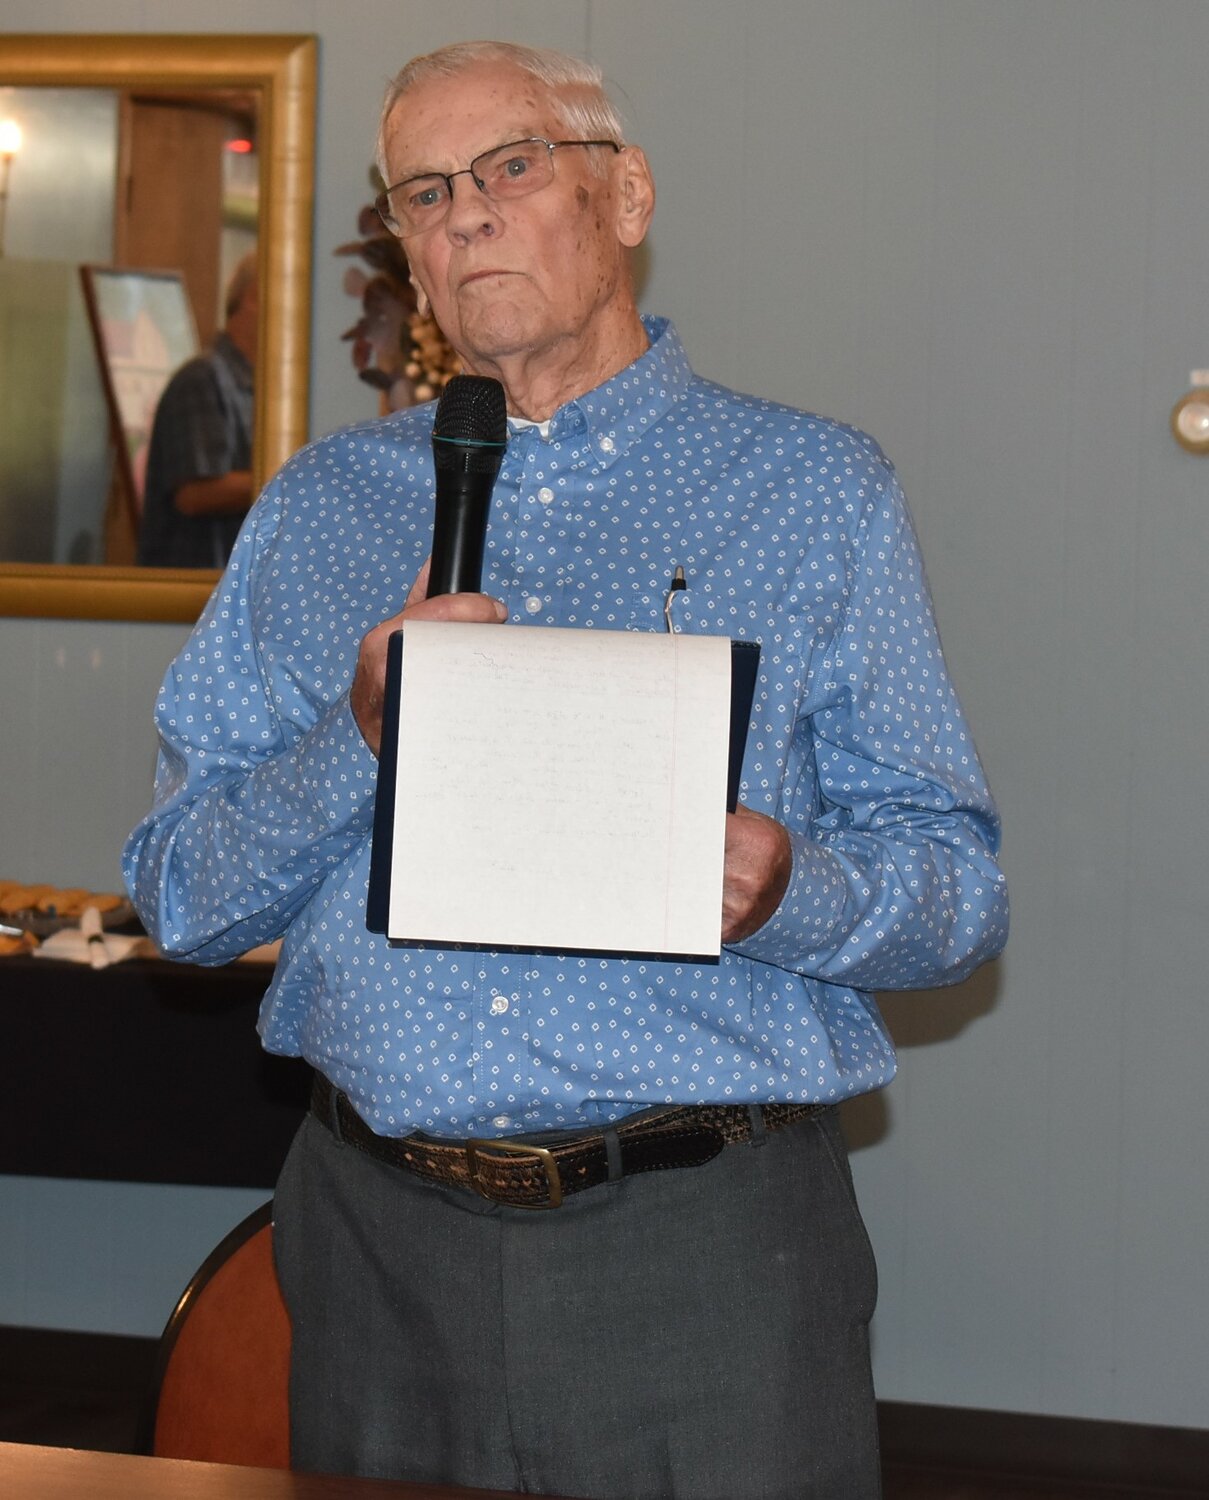 Frank thanked everyone who came to his party at Meadowview on Saturday, April 27.